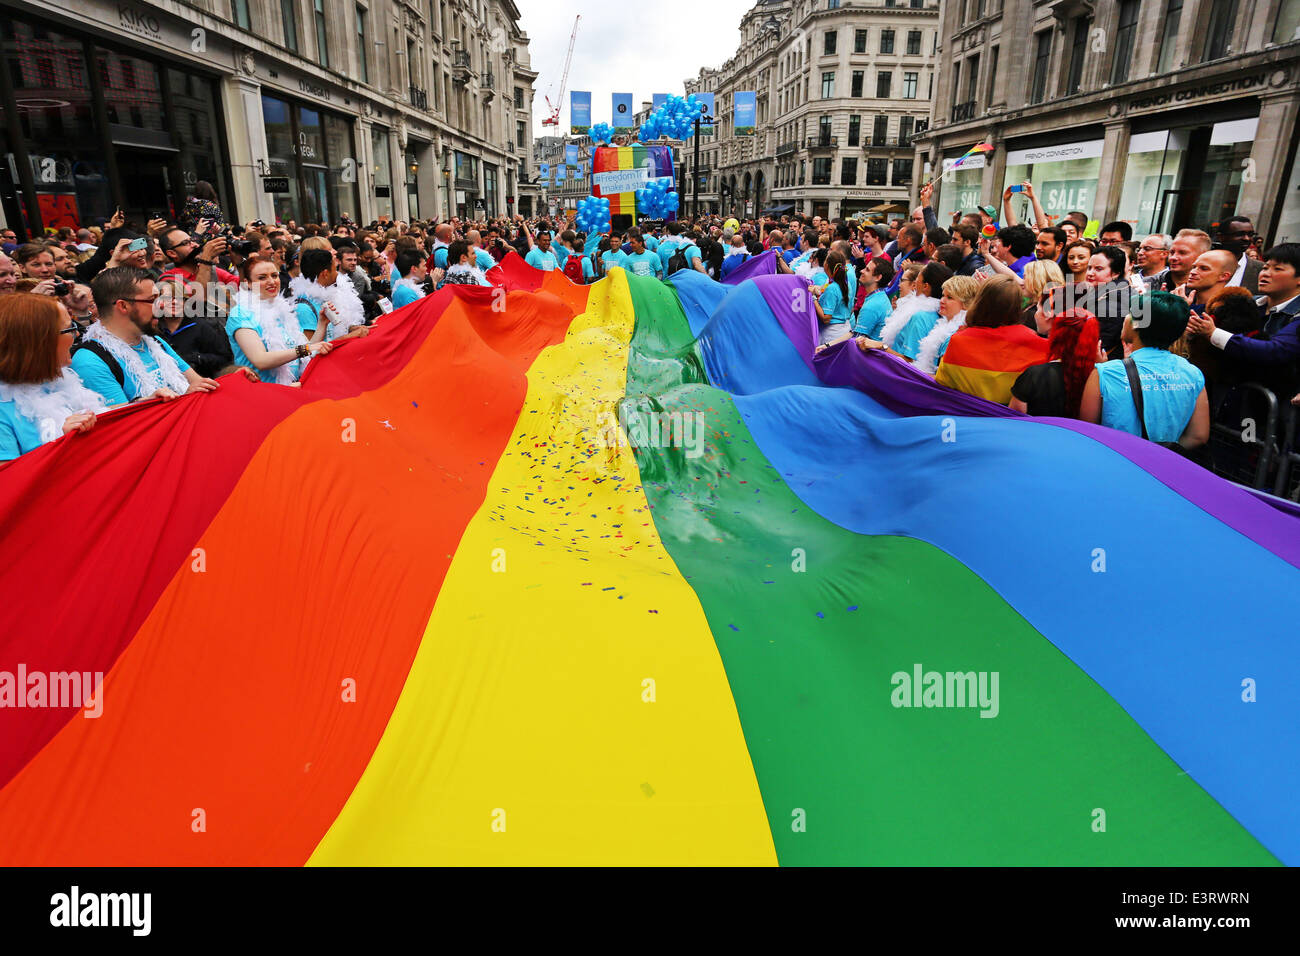 London, UK. 28th June 2014. Giant rainbow flag at the Pride London Parade 2014 in London. Rain storms throughout the day didn't dampen the spirits of the 20,000 people in the parade of the crowds in the packed streets watching. It did however bring out plenty of rainbow umbrellas. Credit:  Paul Brown/Alamy Live News Stock Photo